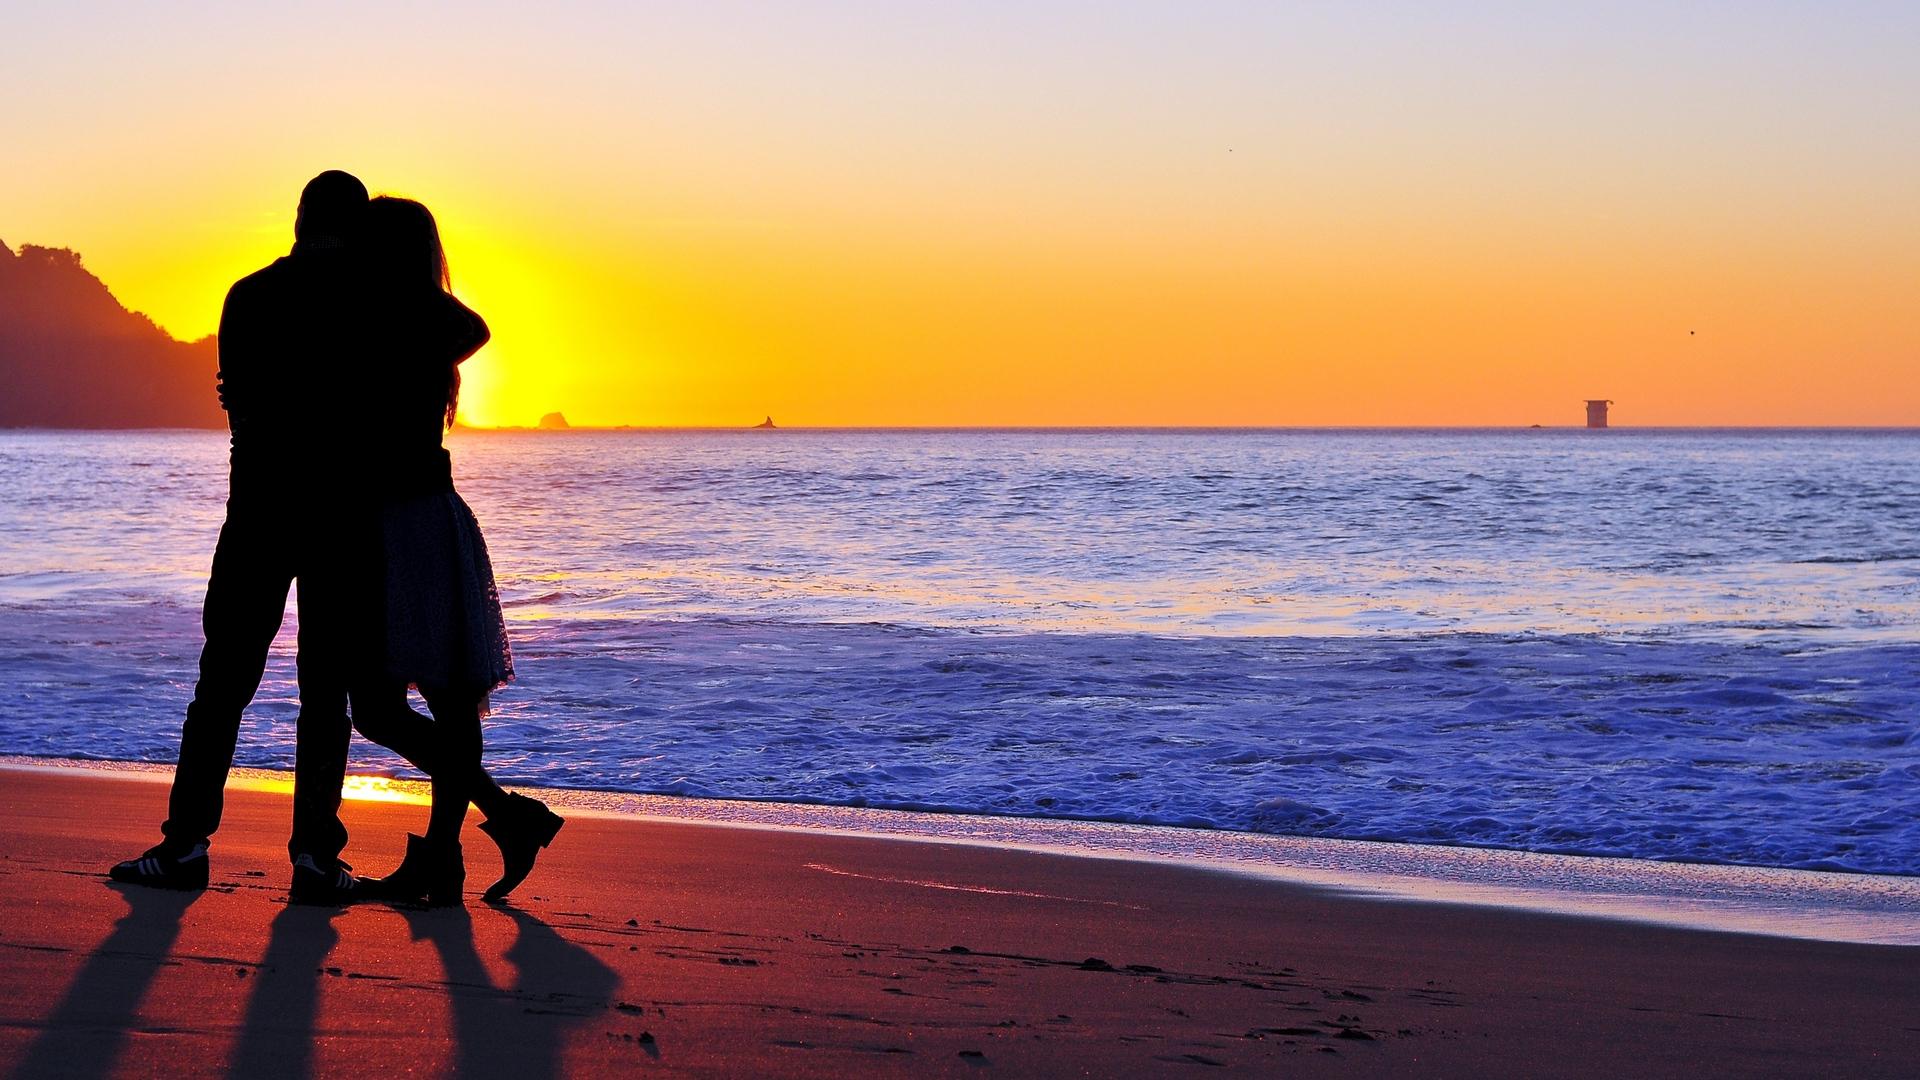 Download wallpaper 1920x1080 couple, silhouettes, hugs, love